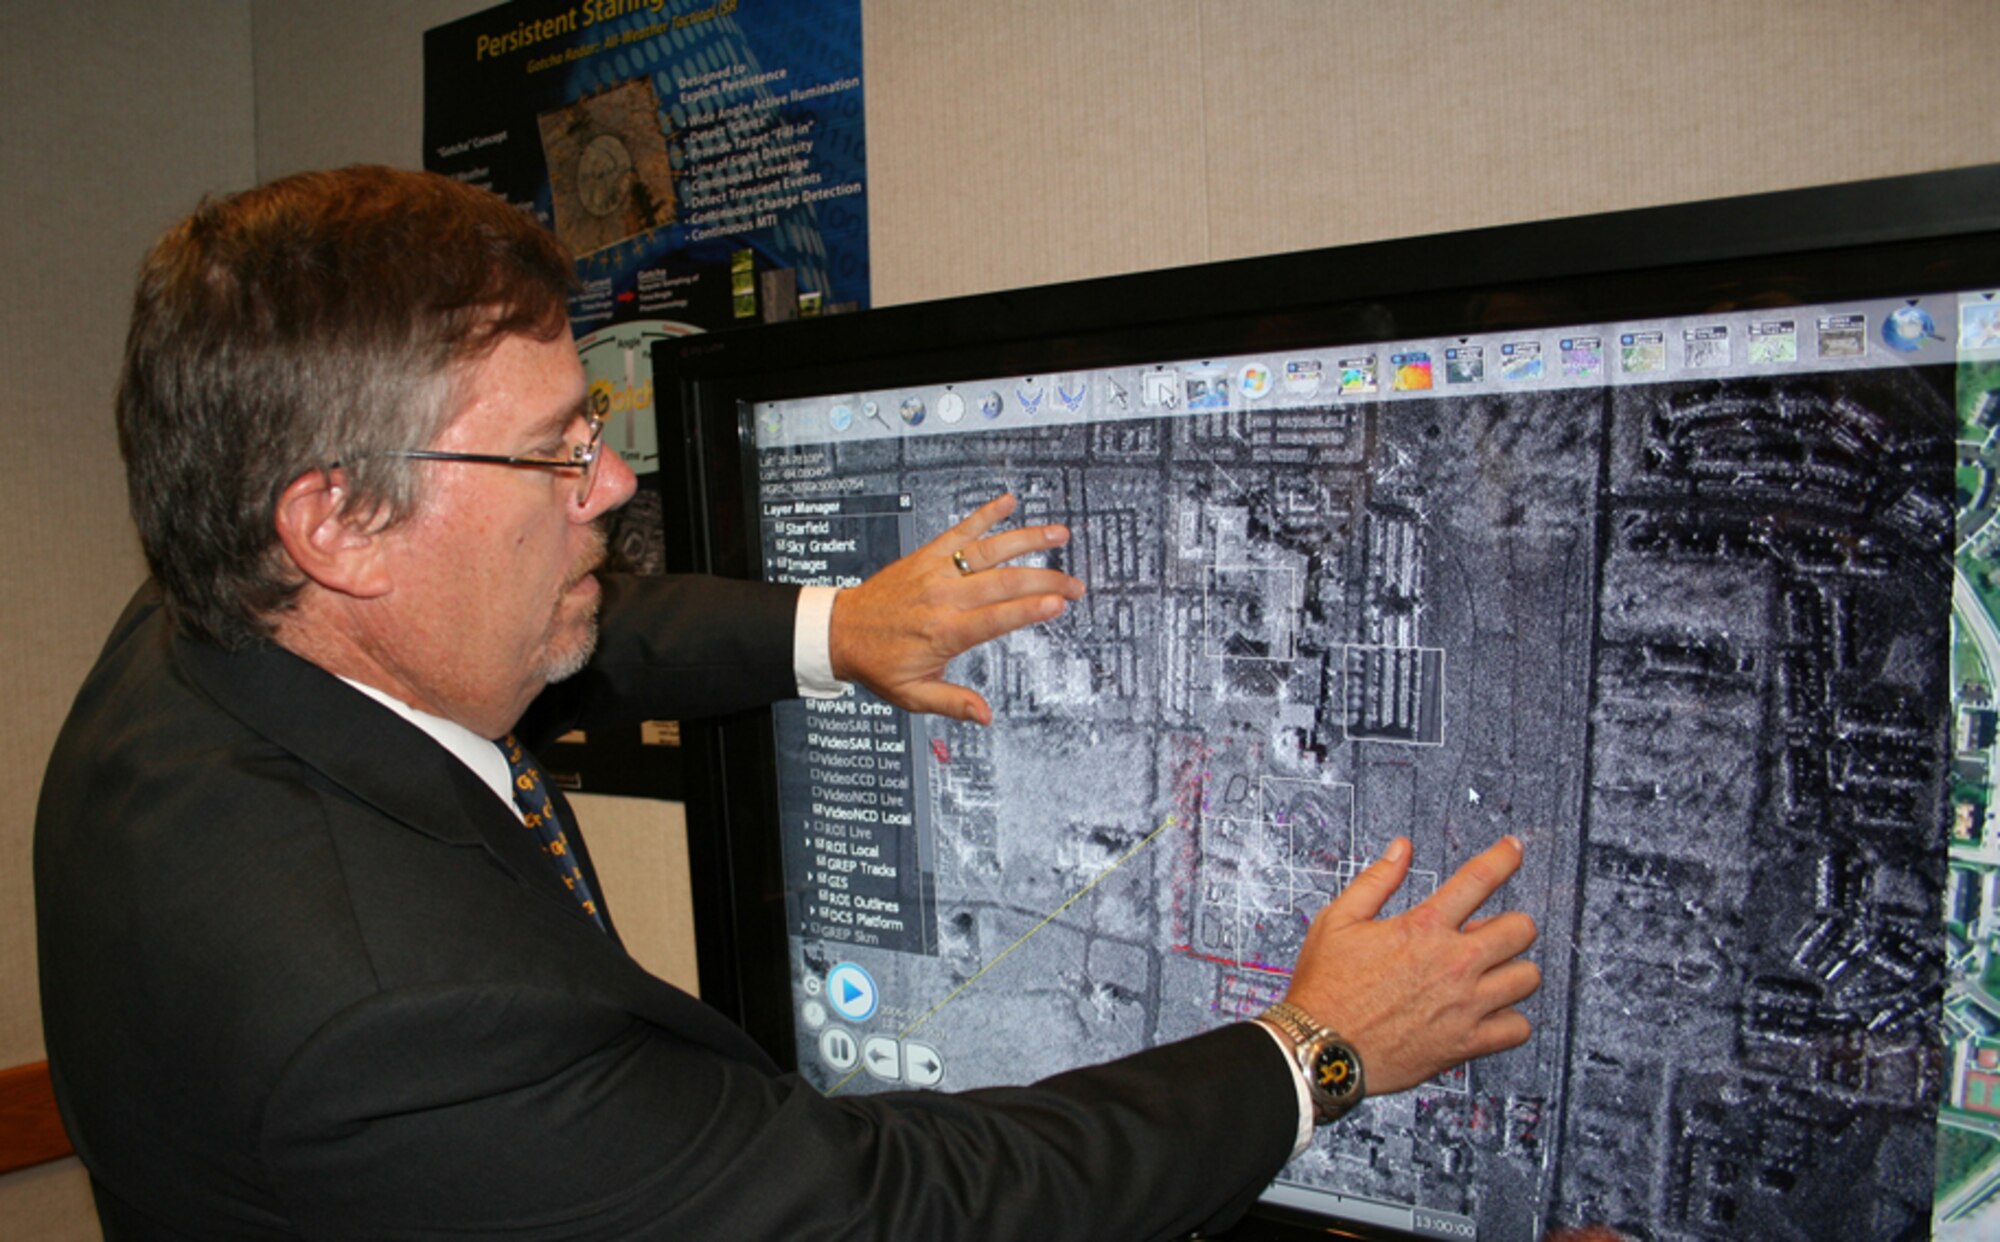 Dr. Michael Minardi uses a touch screen August 31 to demonstrate synthetic aperture radar imagery captured during a previous test of the Gotcha radar system over Wright-Patterson Air Force Base, Ohio. Air Force Research Laboratory is developing Gotcha with the aid of an SGI Altix ICE 8200 supercomputer which will translate raw radar data in real-time into high-resolution 3-dimensional images. Gotcha is one of portfolio of research efforts to provide enhanced intelligence, surveillance and reconnaissance capabilities to future joint warfighters. Dr. Minardi is Gotcha program manager with AFRL’s Sensors Directorate. (U.S. Air Force photo/Charles Abruzzino)